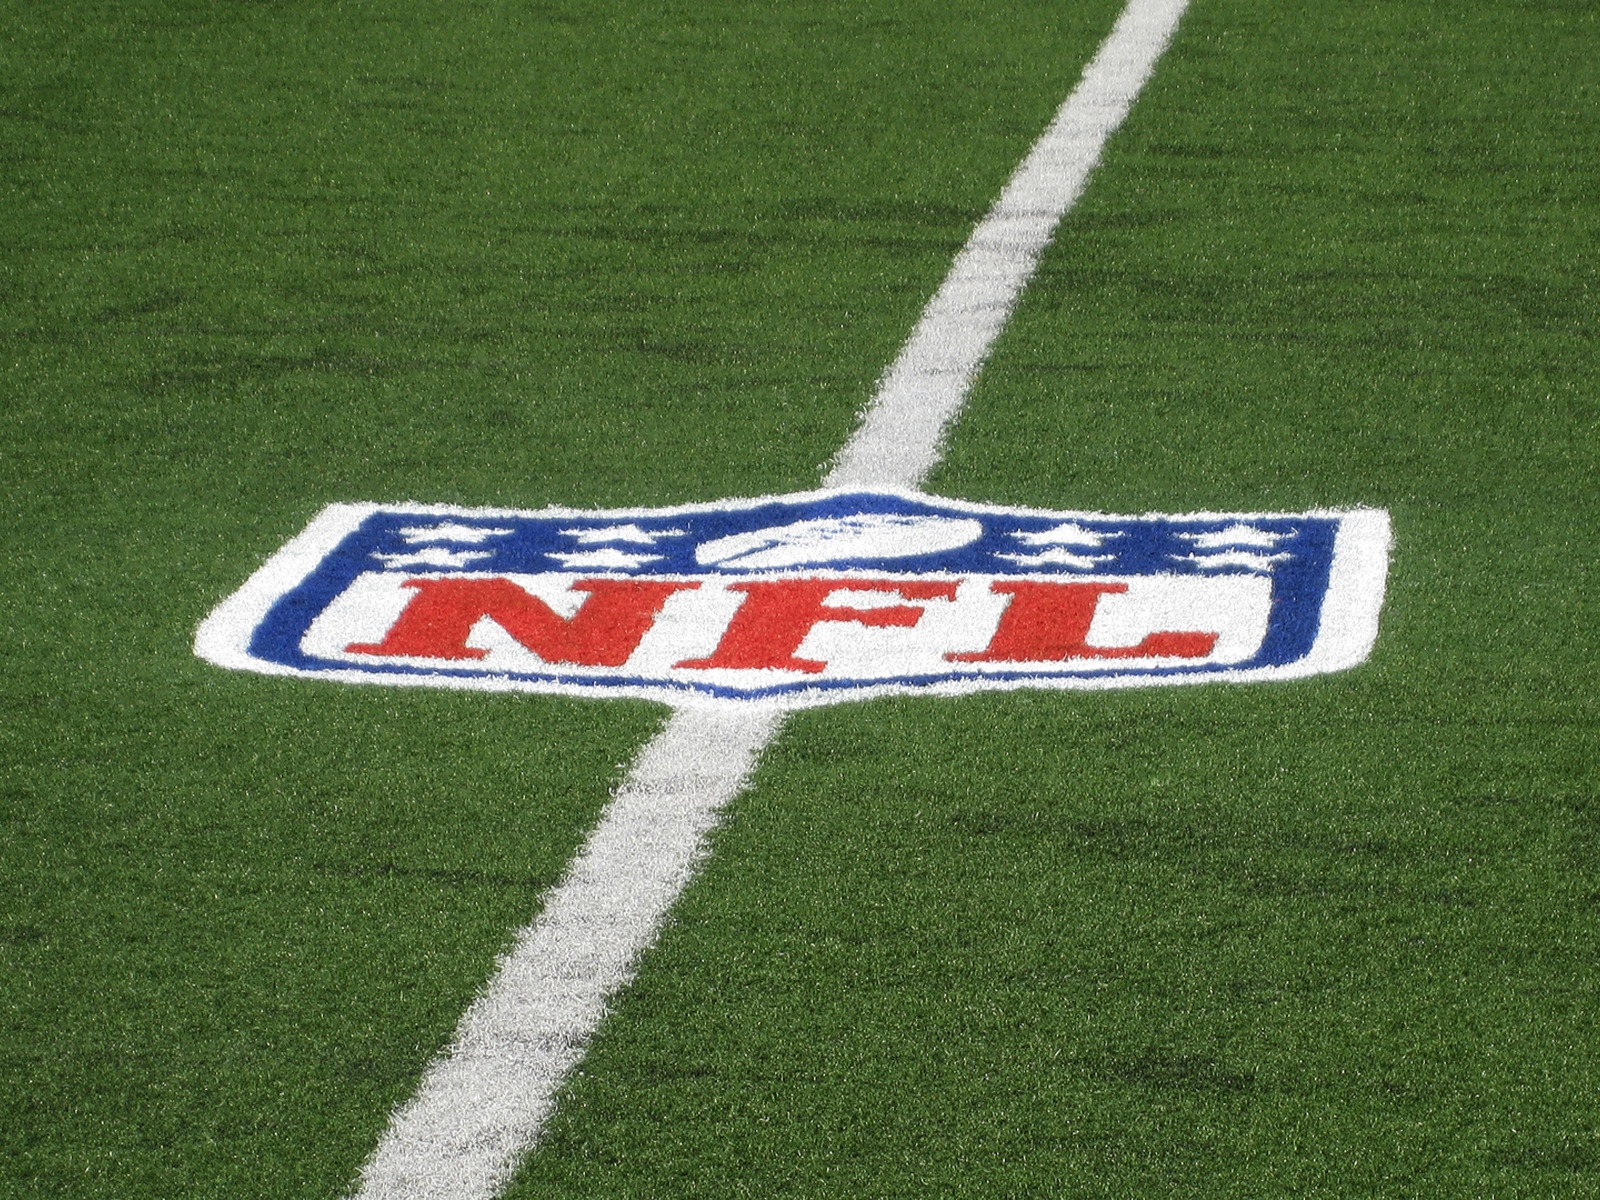 NFL Field for 1600 x 1200 resolution